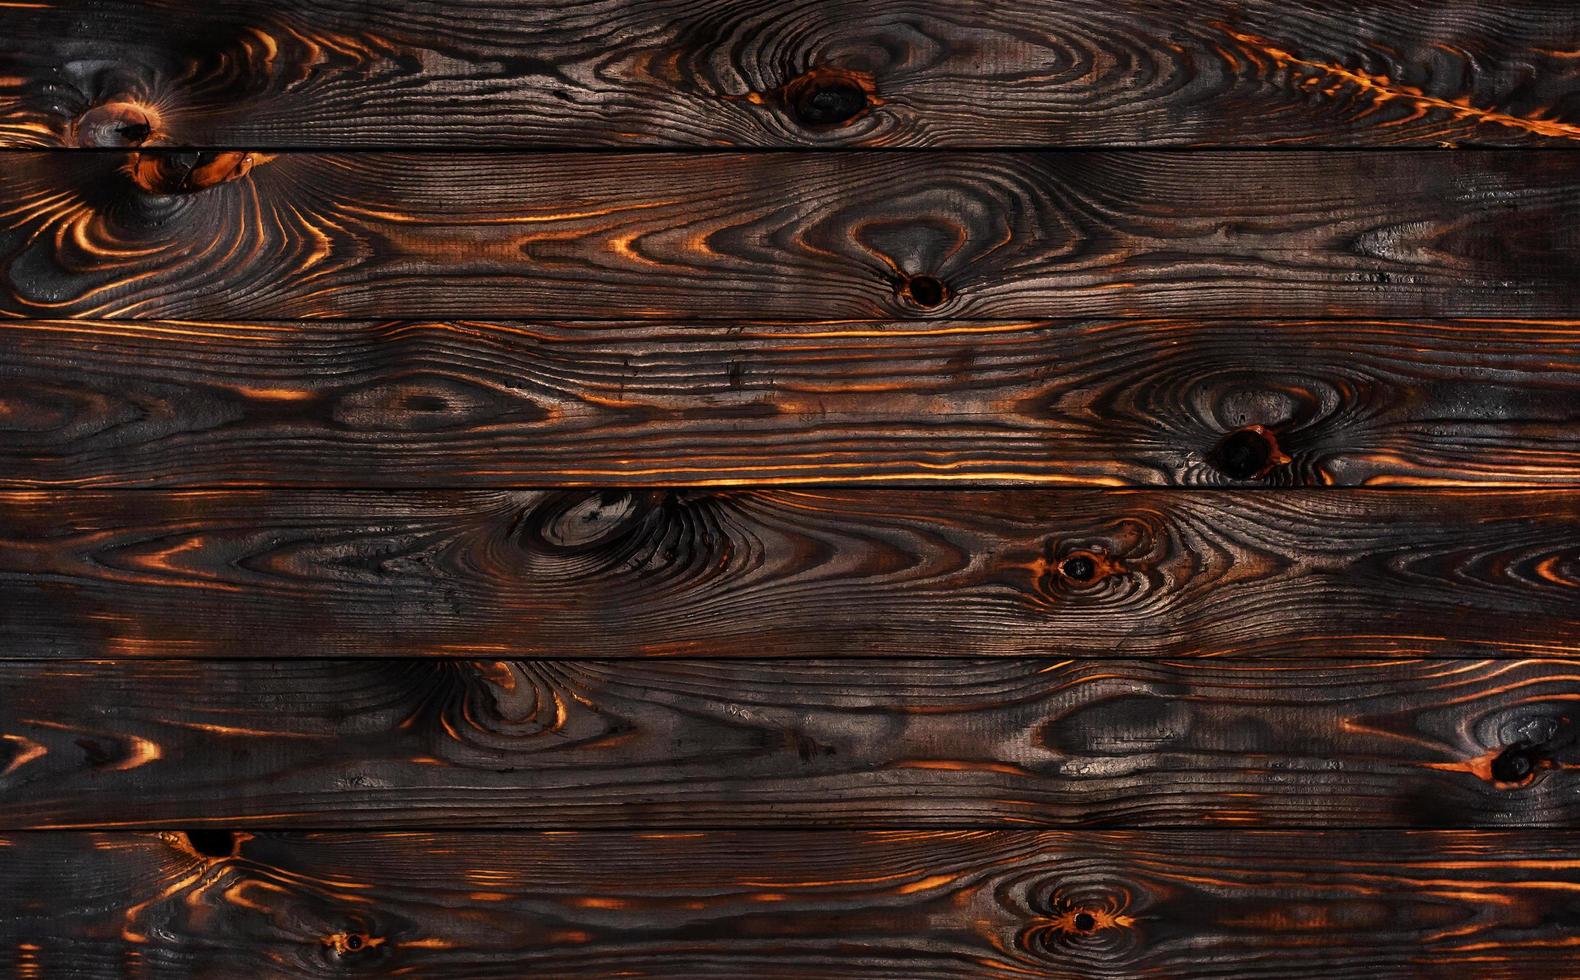 Burnt wooden board, black charcoal wood texture, burned barbecue background photo